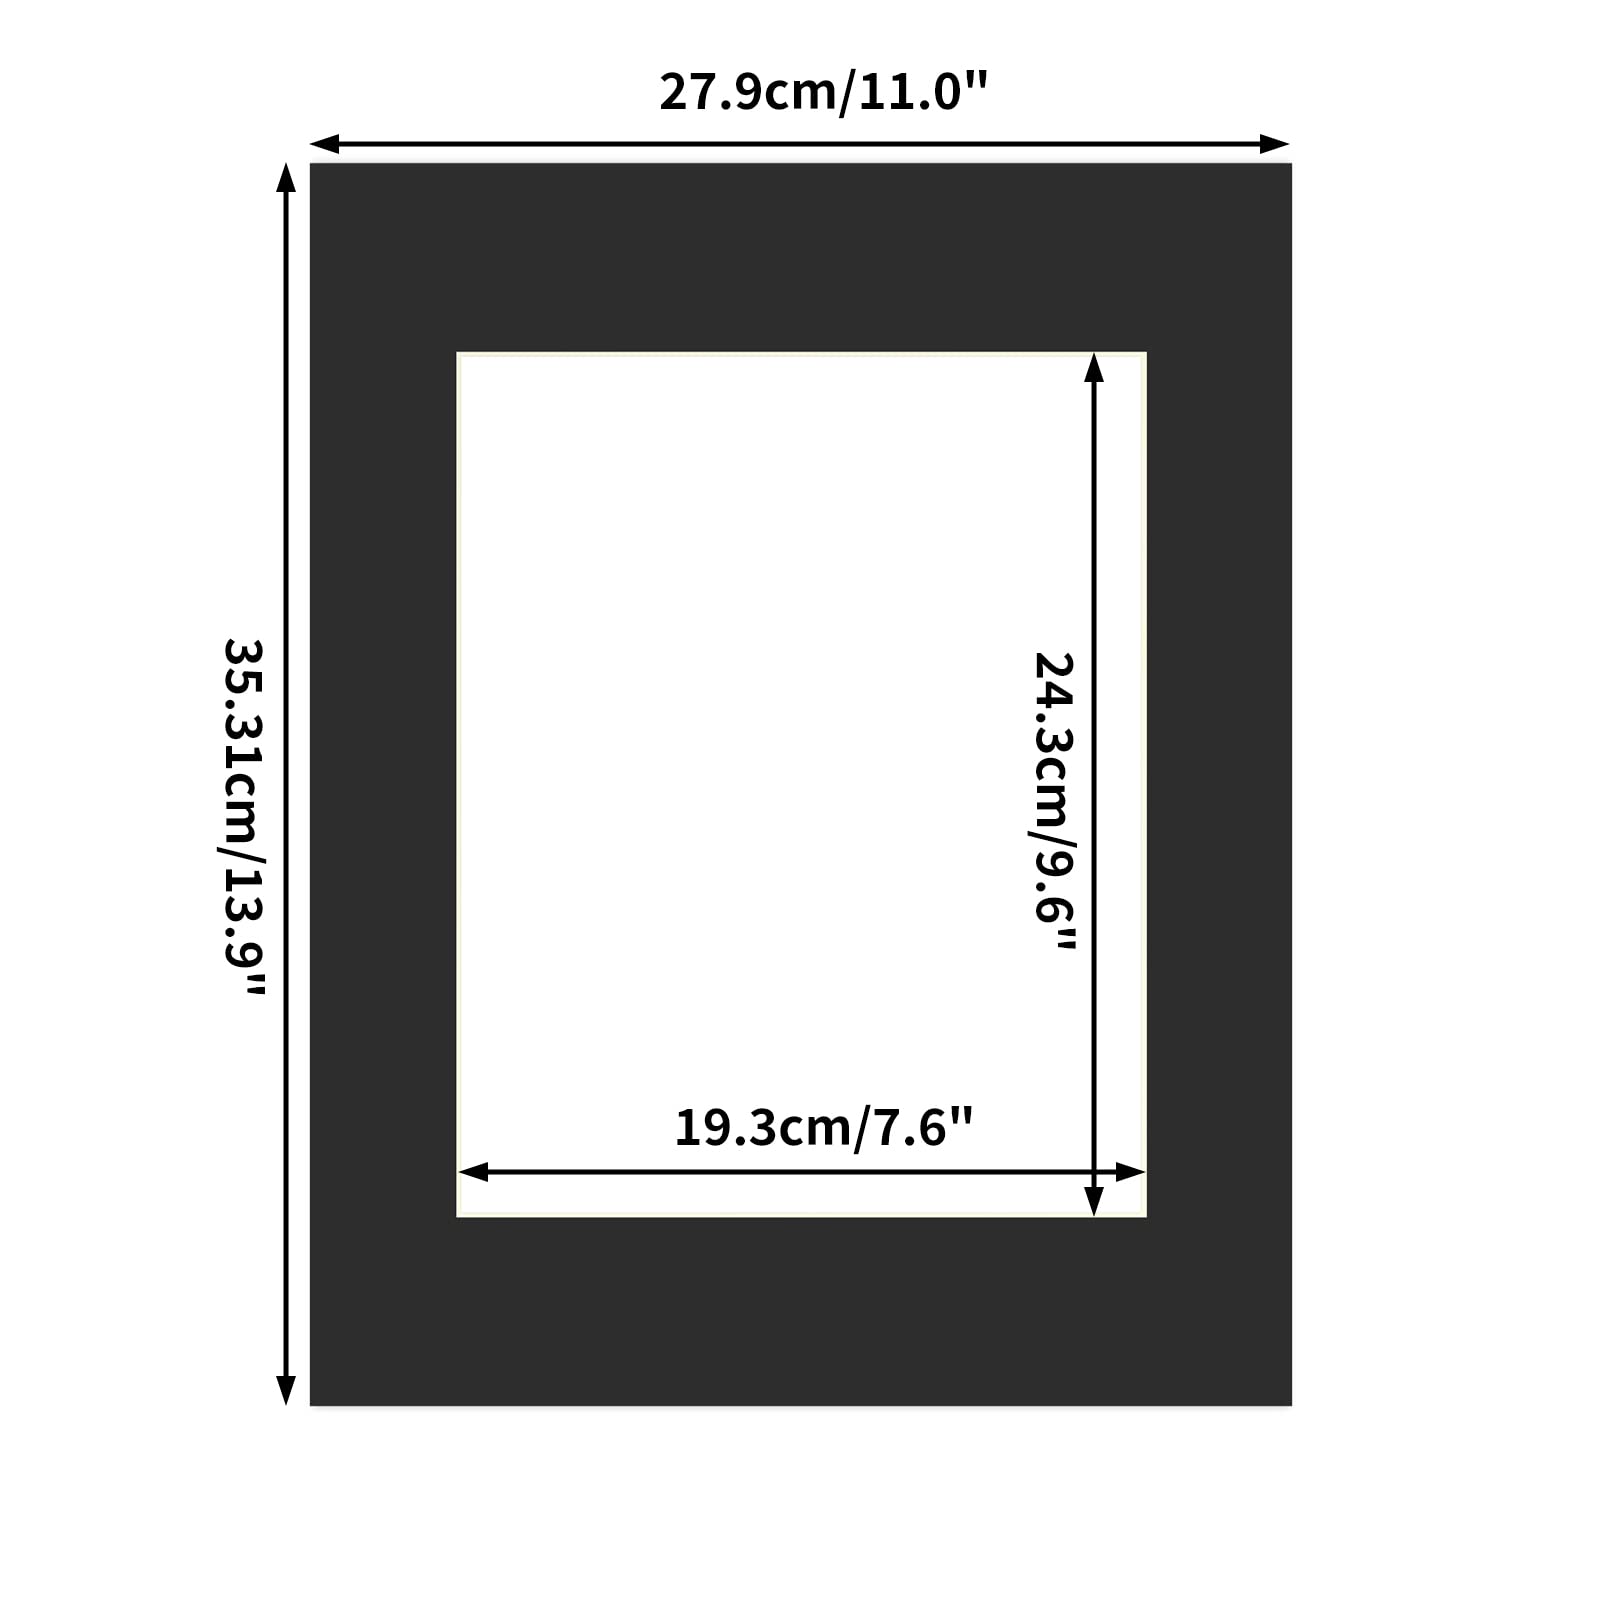 ZBEIVAN 11x14 Black Picture Mats with White Core Bevel Cut Frame Mattes for 8x10 Pictures - Pack of 12